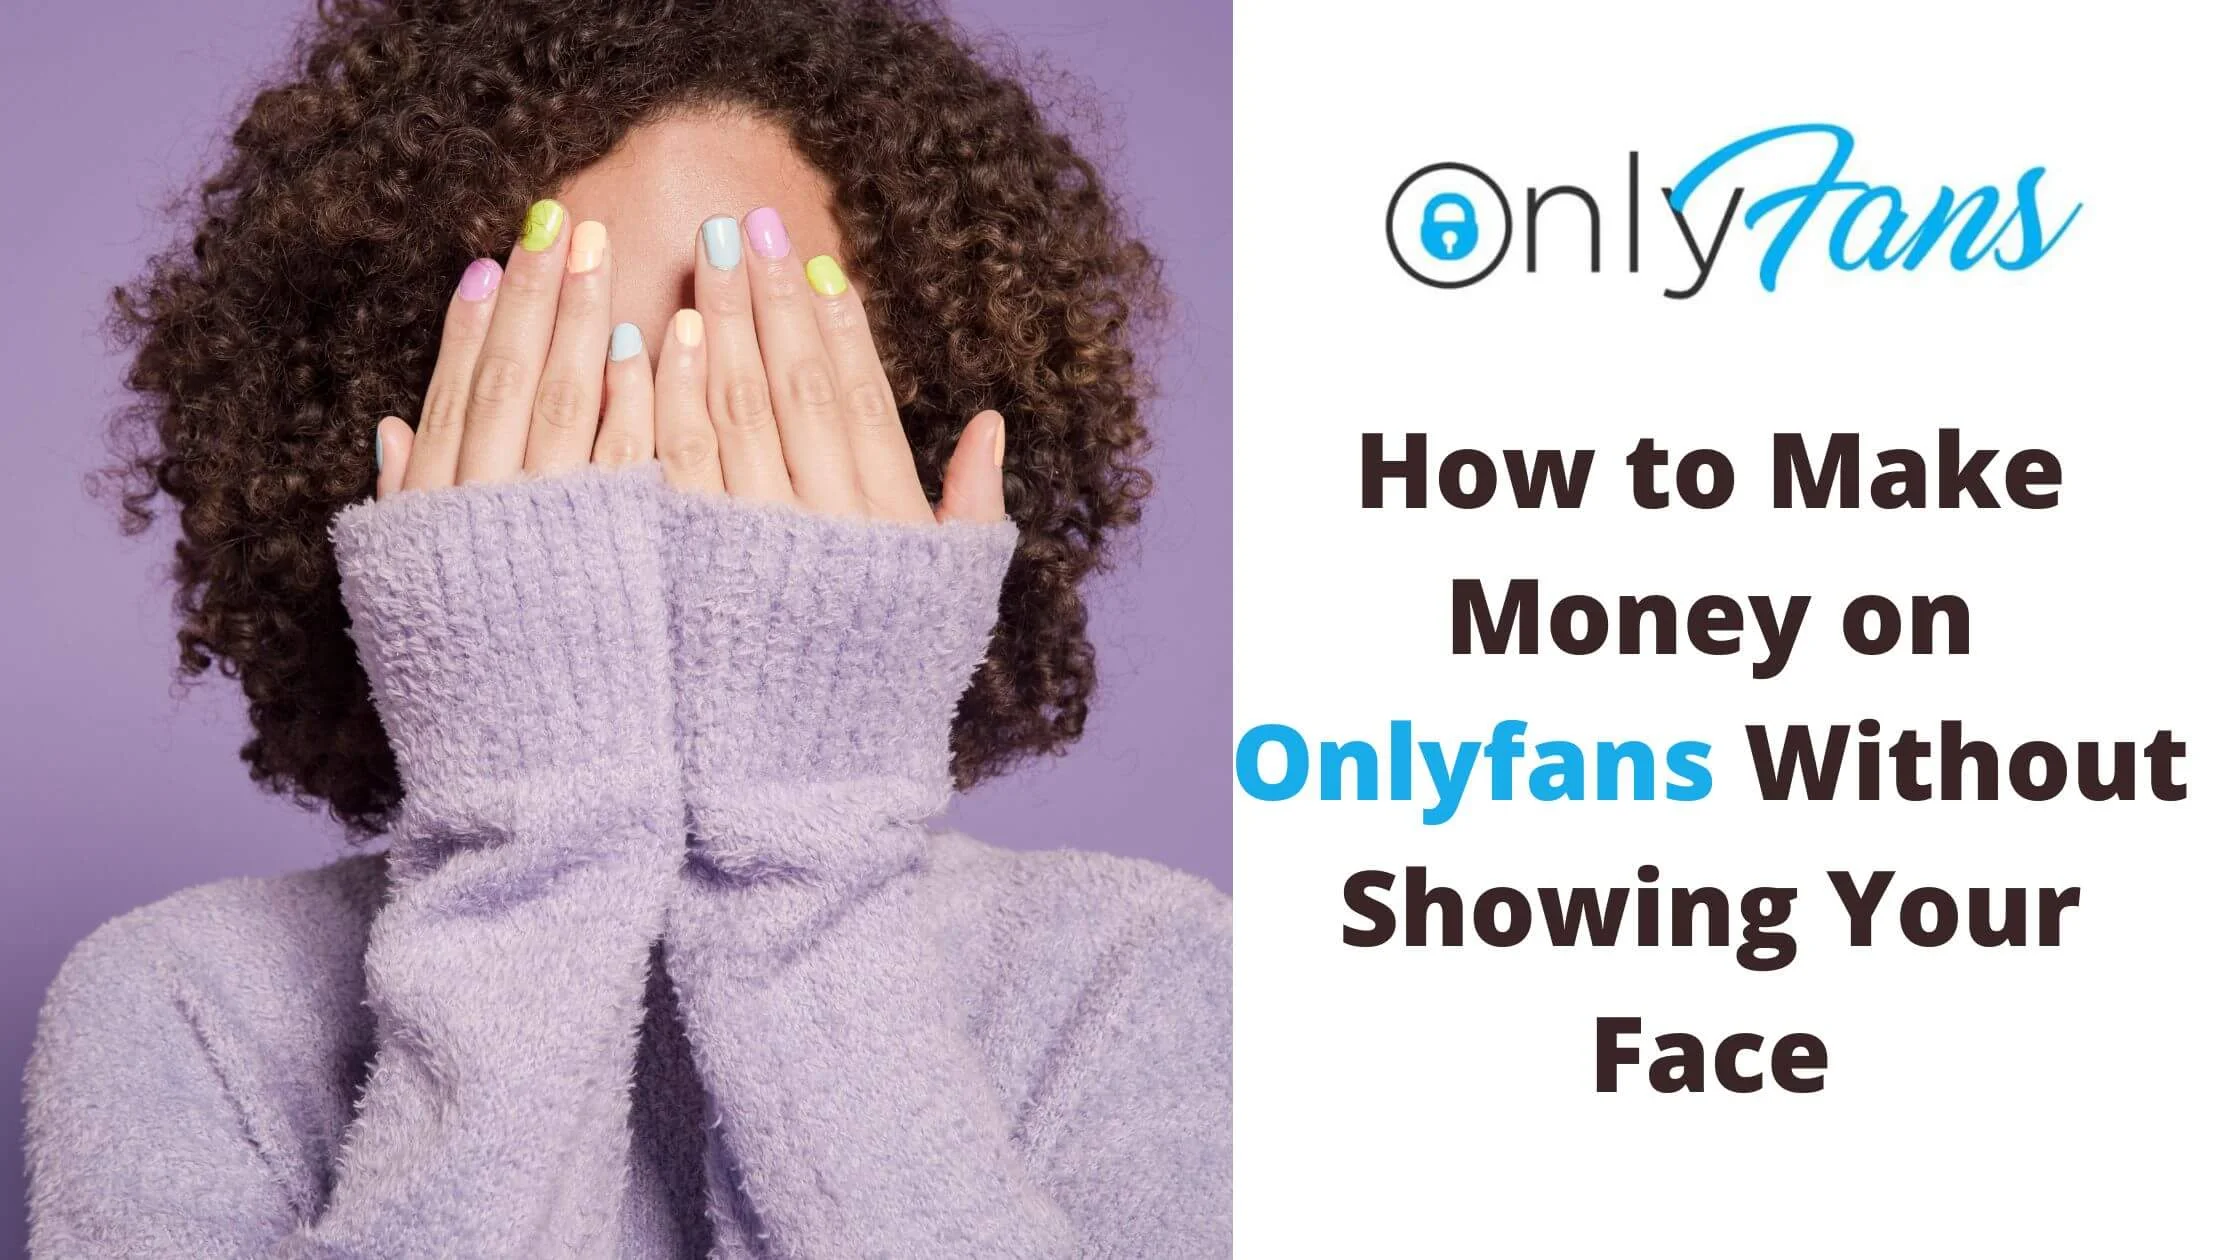 Make Money on Onlyfans Without Showing Your Face